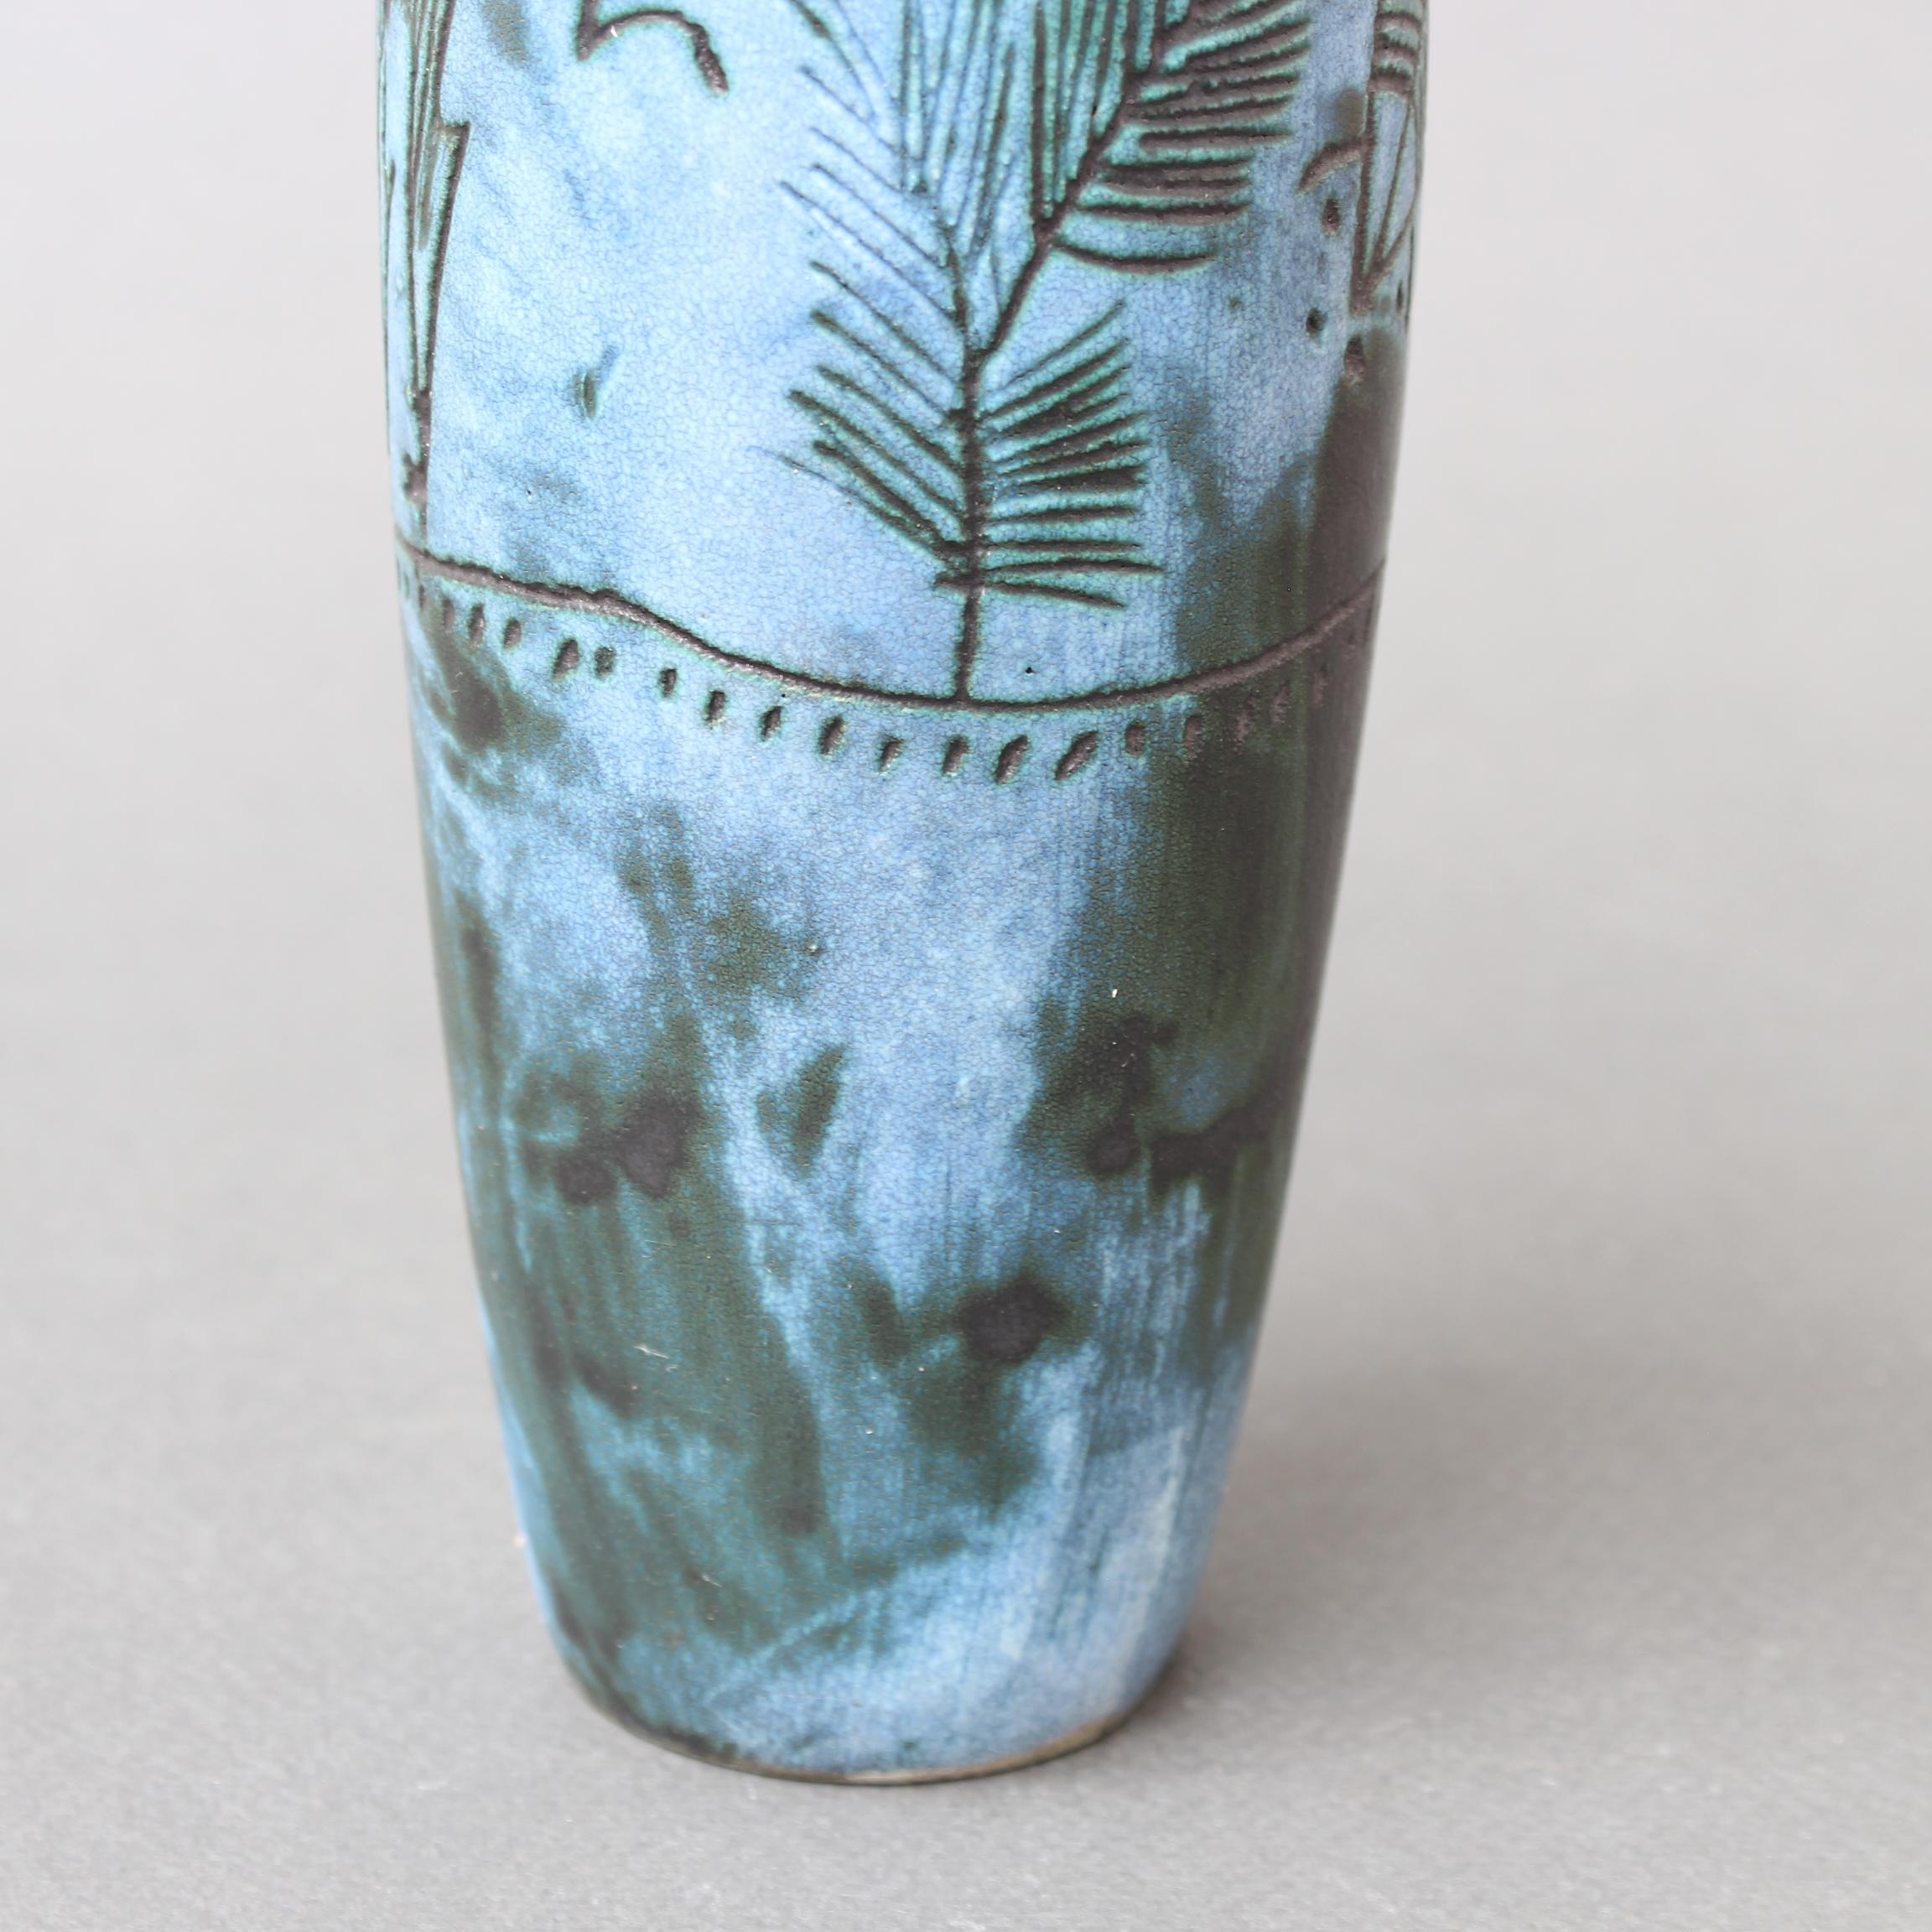 Vintage French Ceramic Flower Vase by Jacques Blin (circa 1950s) - Small For Sale 8